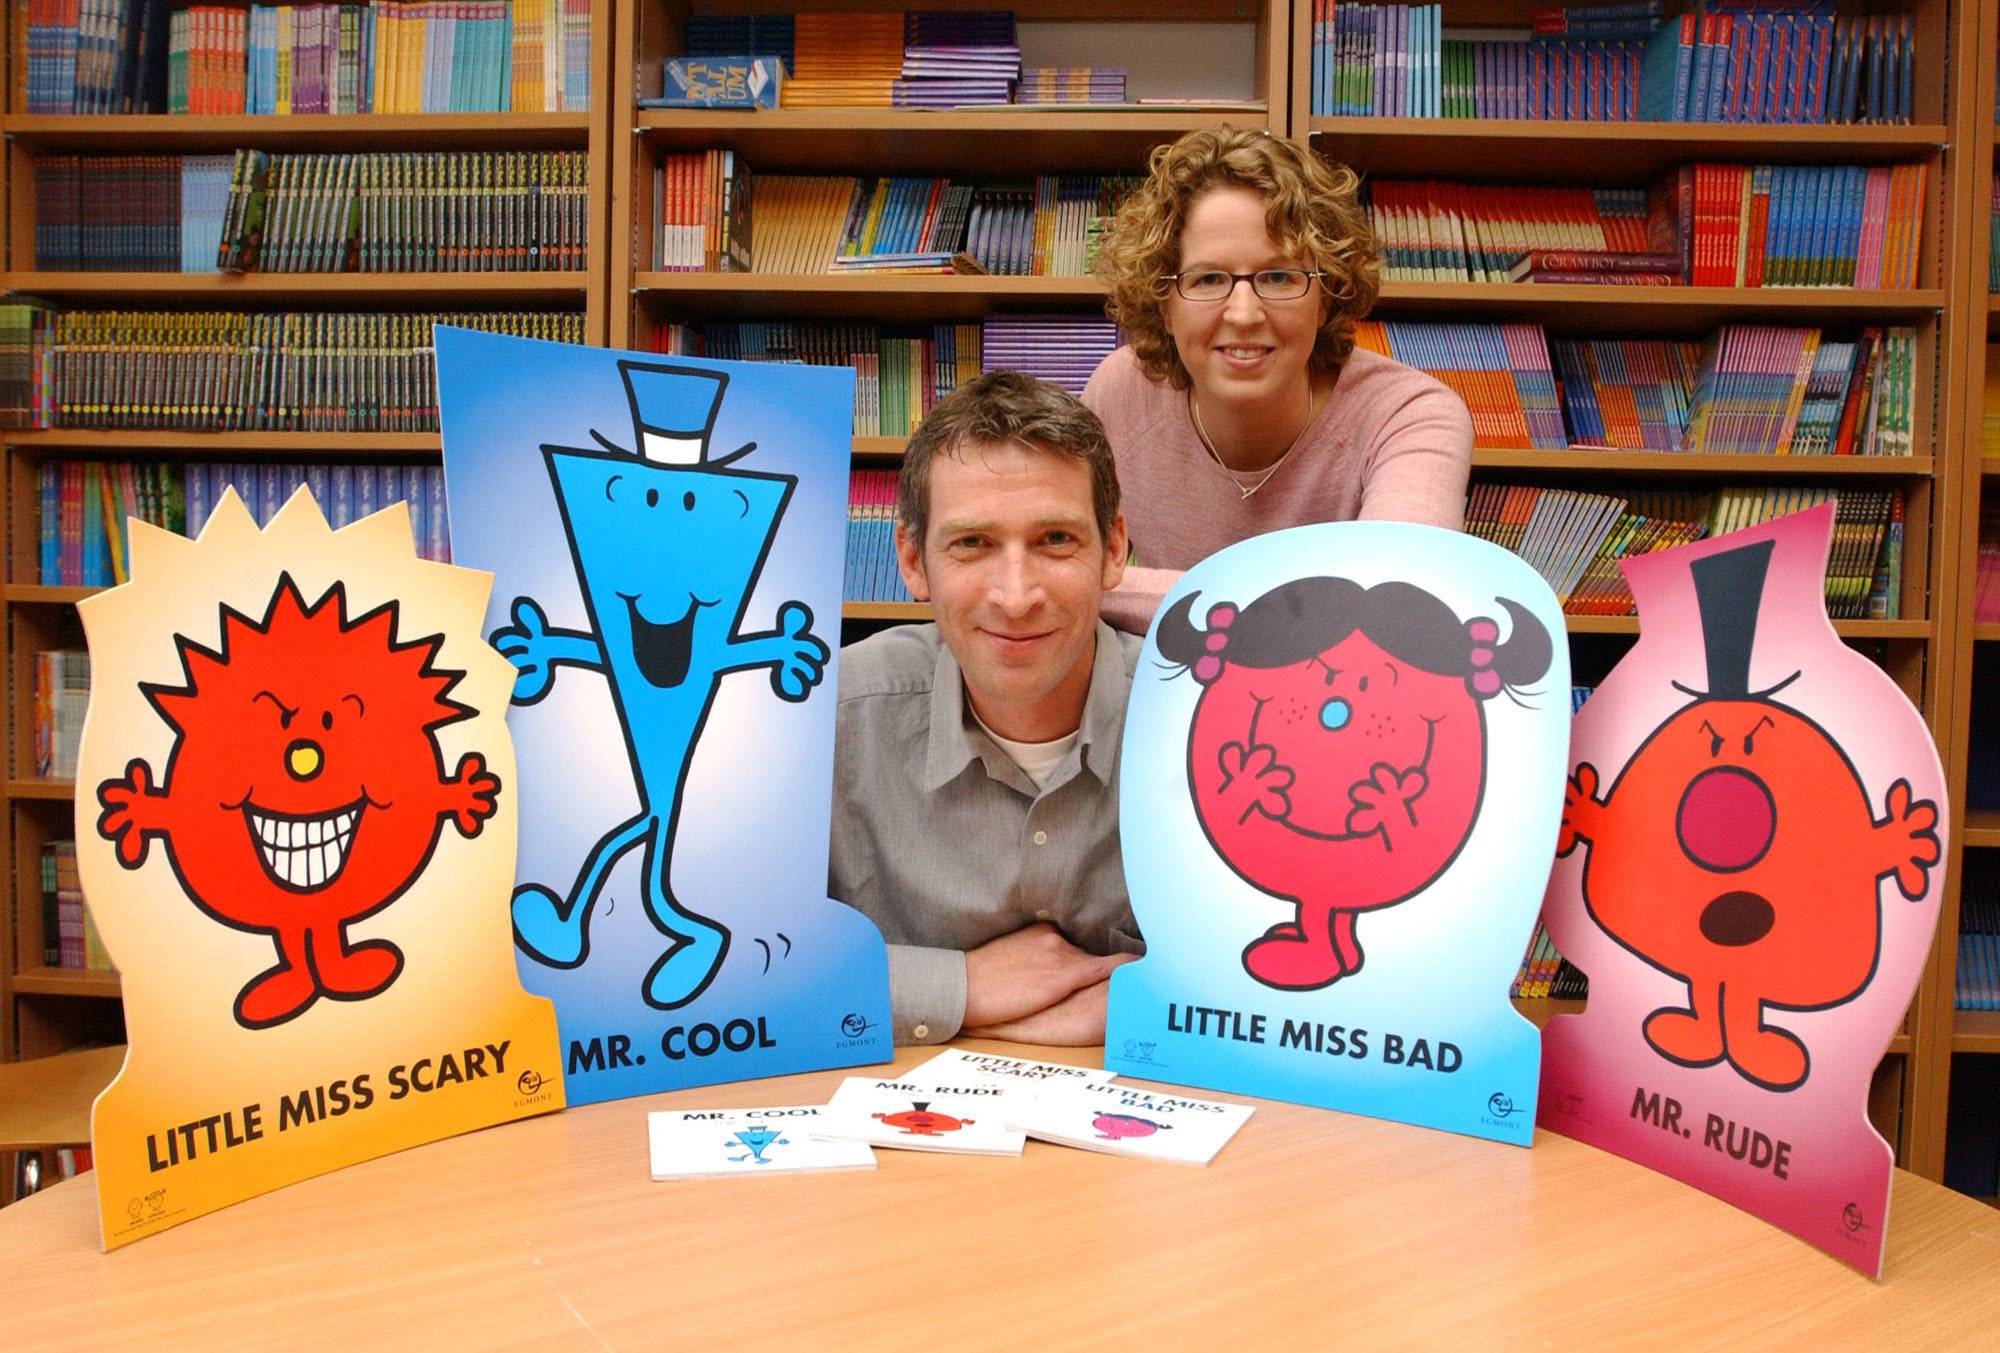 Adam and Amelia Hargreaves, son and daughter of Mr Men author Roger Hargreaves at Egmont Books in Kensington High Street, London for the launch of four new Mr Men books.